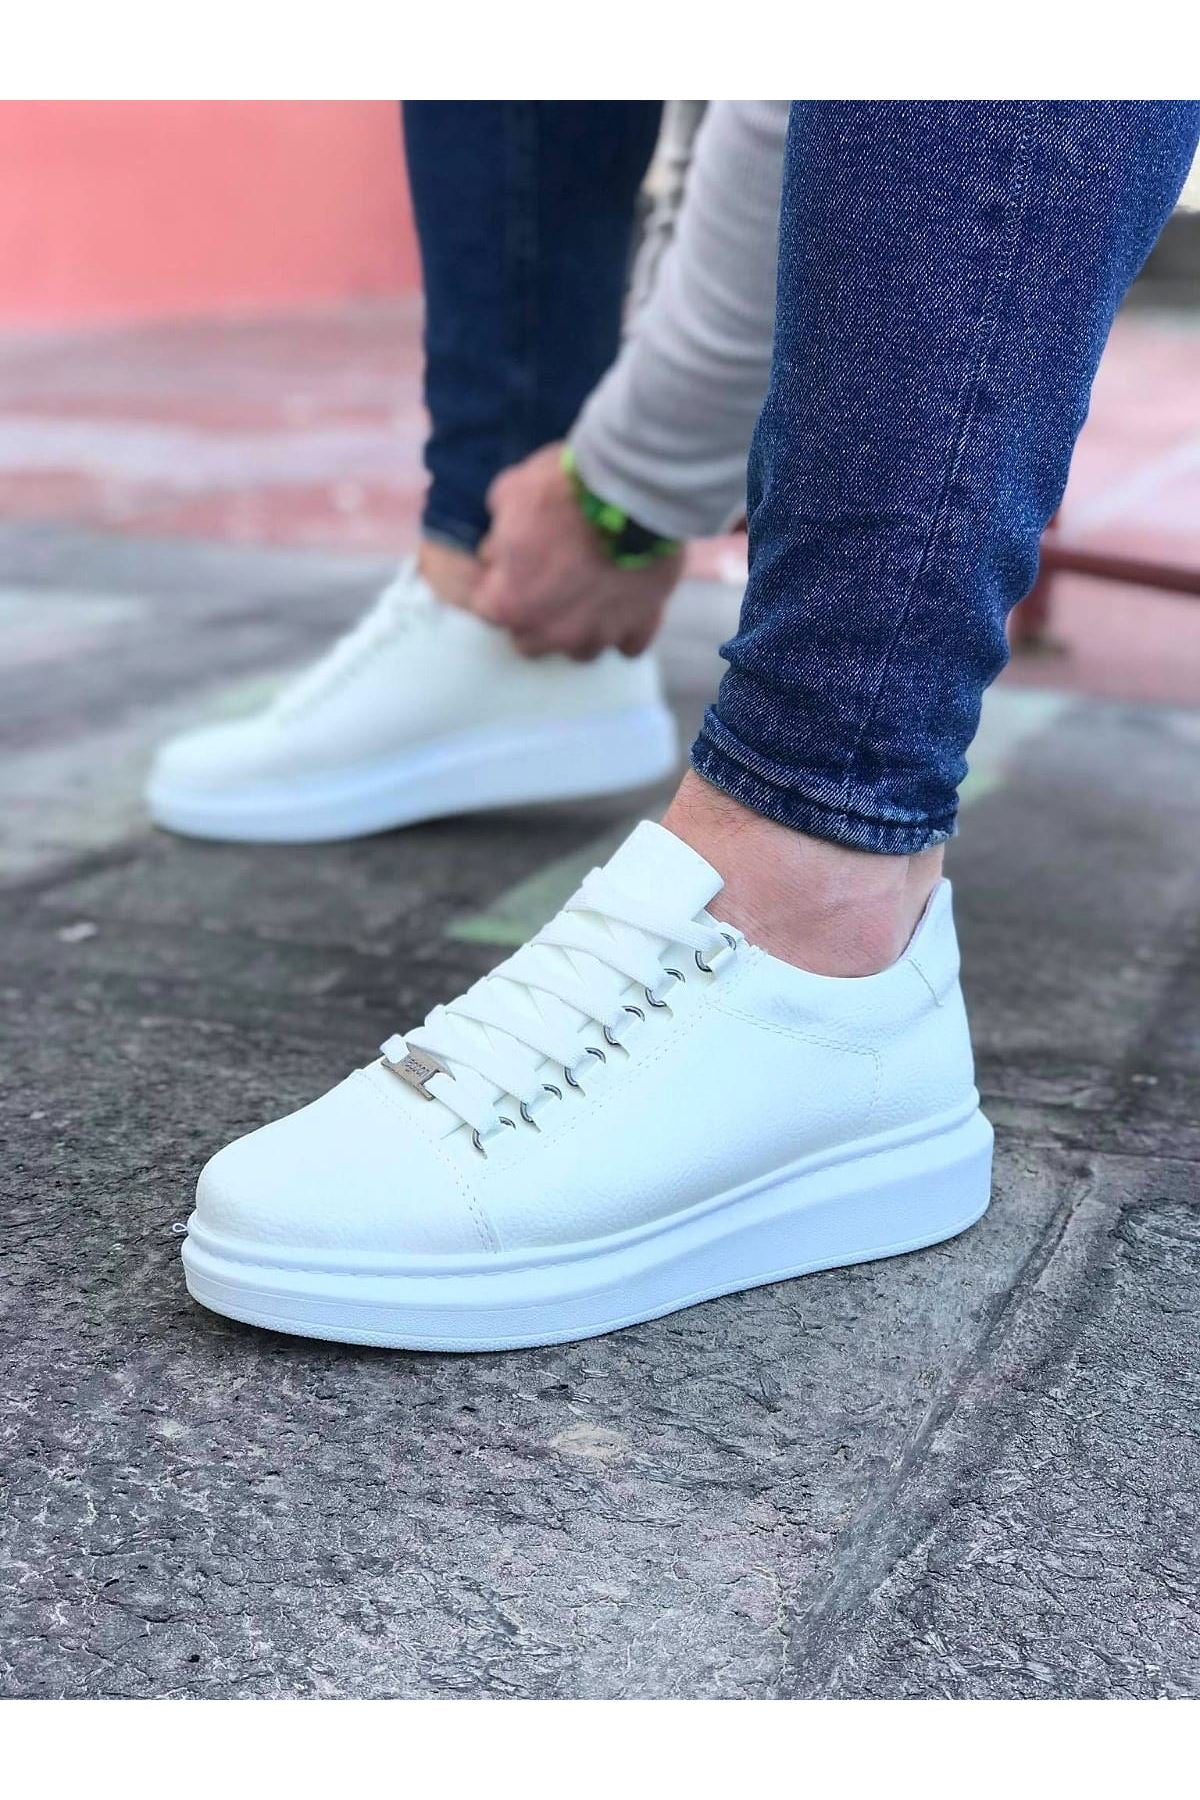 WG08 White Flat Men's Casual Shoes - STREETMODE™